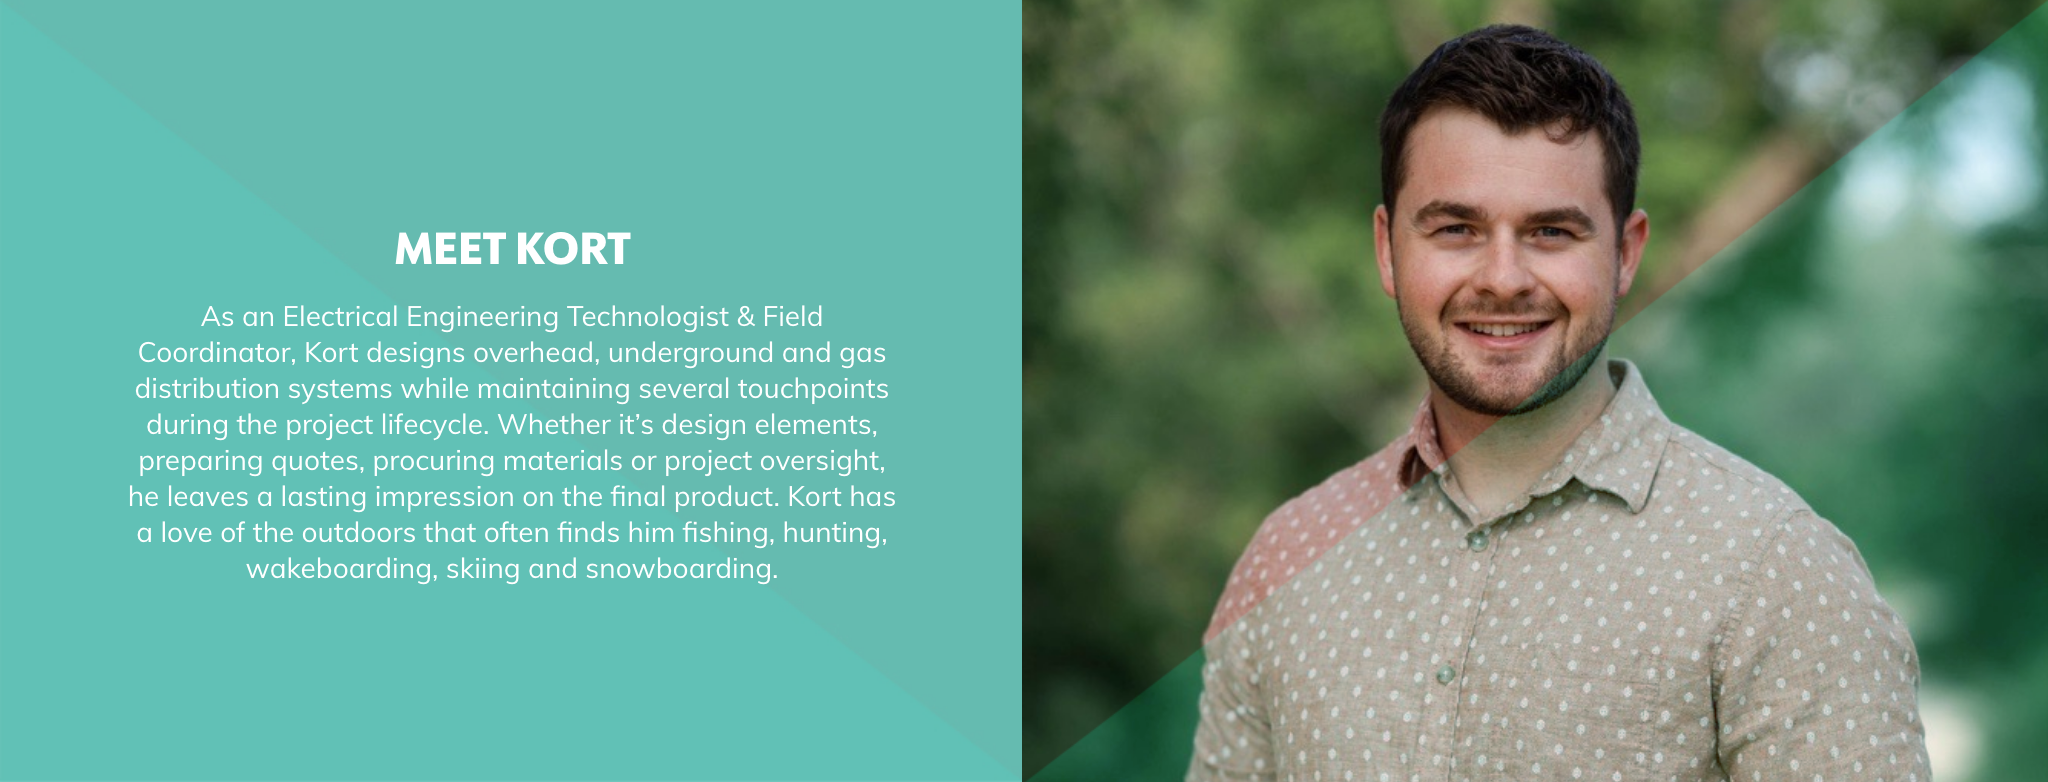 As an Electrical Engineering Technologist & Field Coordinator, Kort designs overhead, underground and gas distribution systems while maintaining several touchpoints during the project lifecycle. Whether it’s design elements, preparing quotes, procuring materials or project oversight, he leaves a lasting impression on the final product. Kort has a love of the outdoors that often finds him fishing, hunting, wakeboarding, skiing and snowboarding.